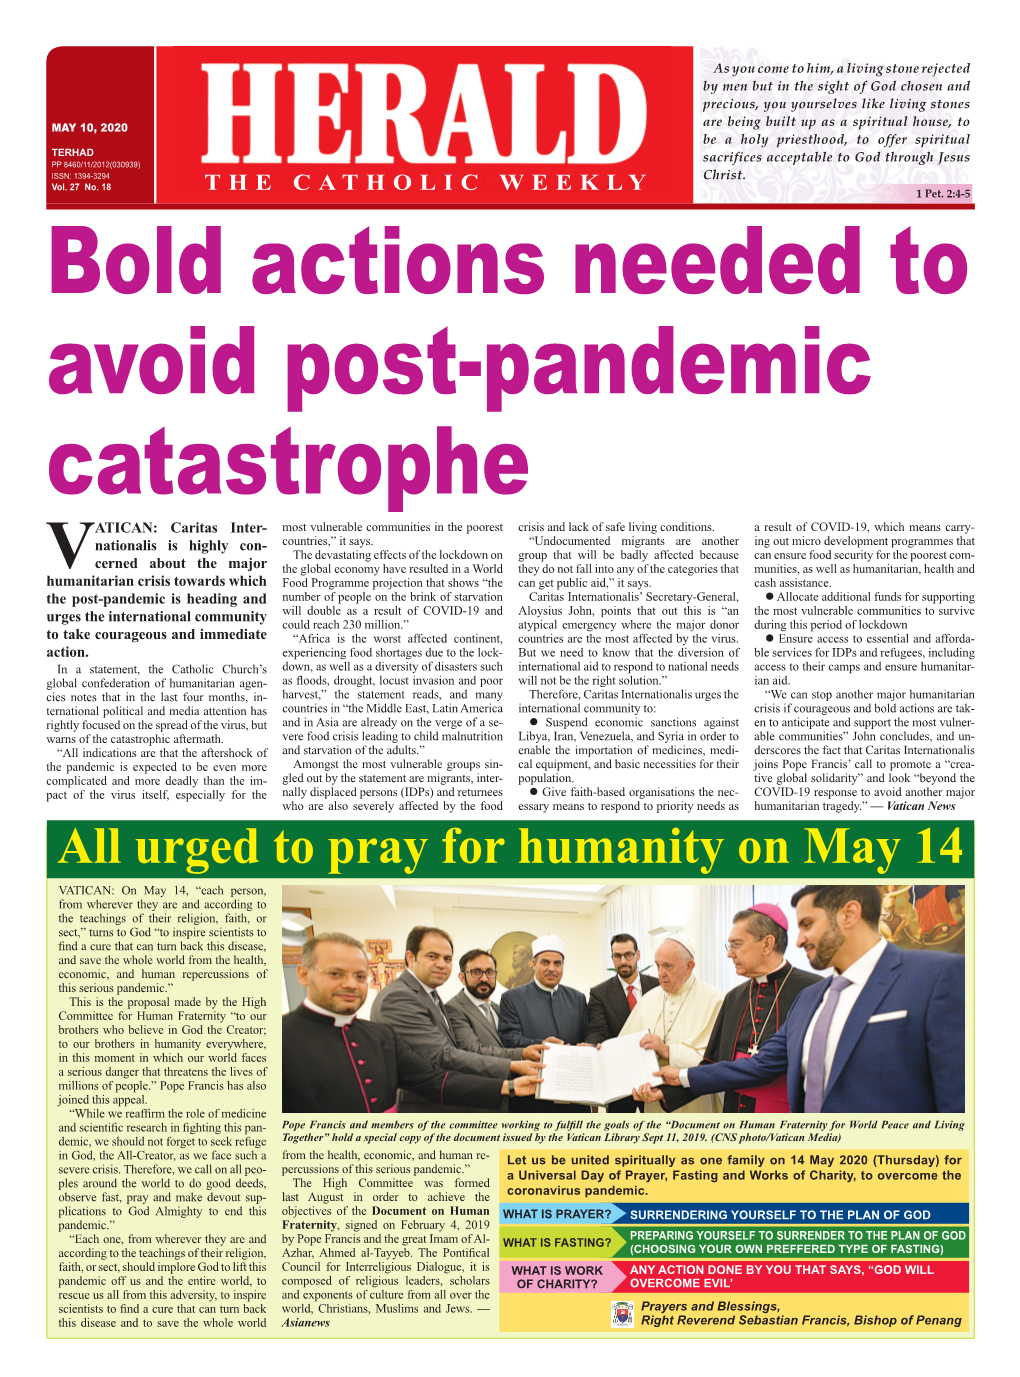 Urged to Pray for Humanity on May 14